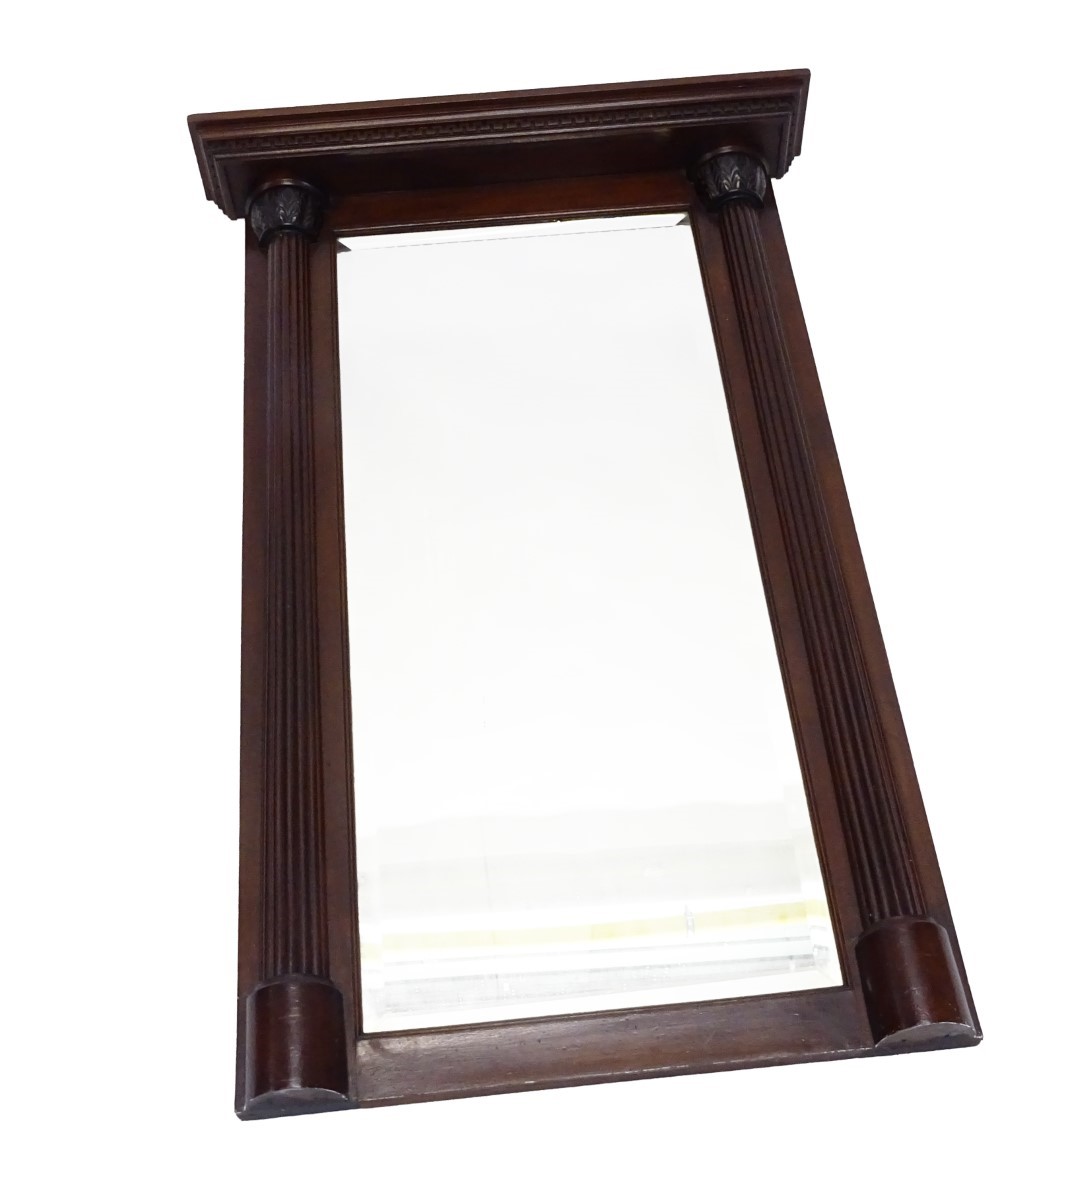 An early 20thC mahogany overmantel mirror, the moulded cornice carved with a Greek key border, above